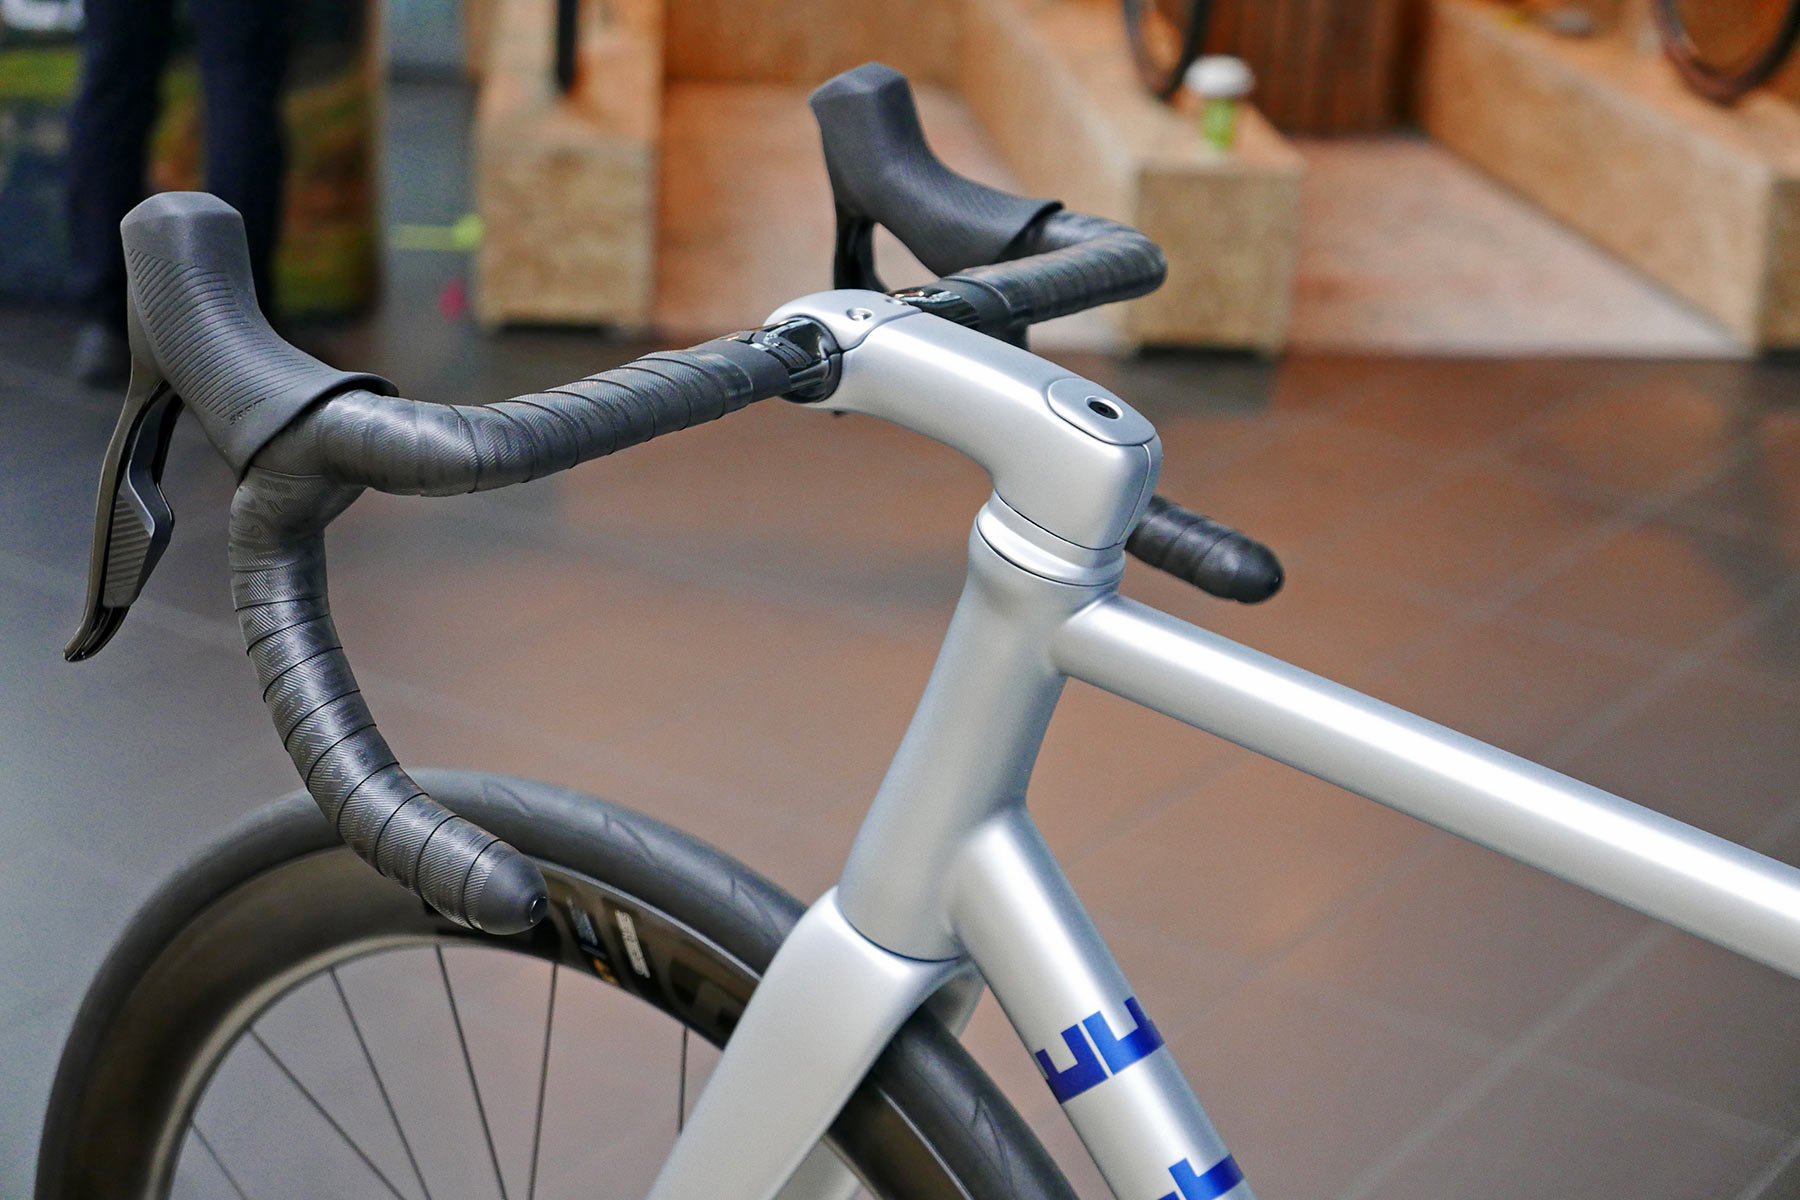 Repete R3 Reason fully integrated handmade modern steel road bike, fully internal cable routing